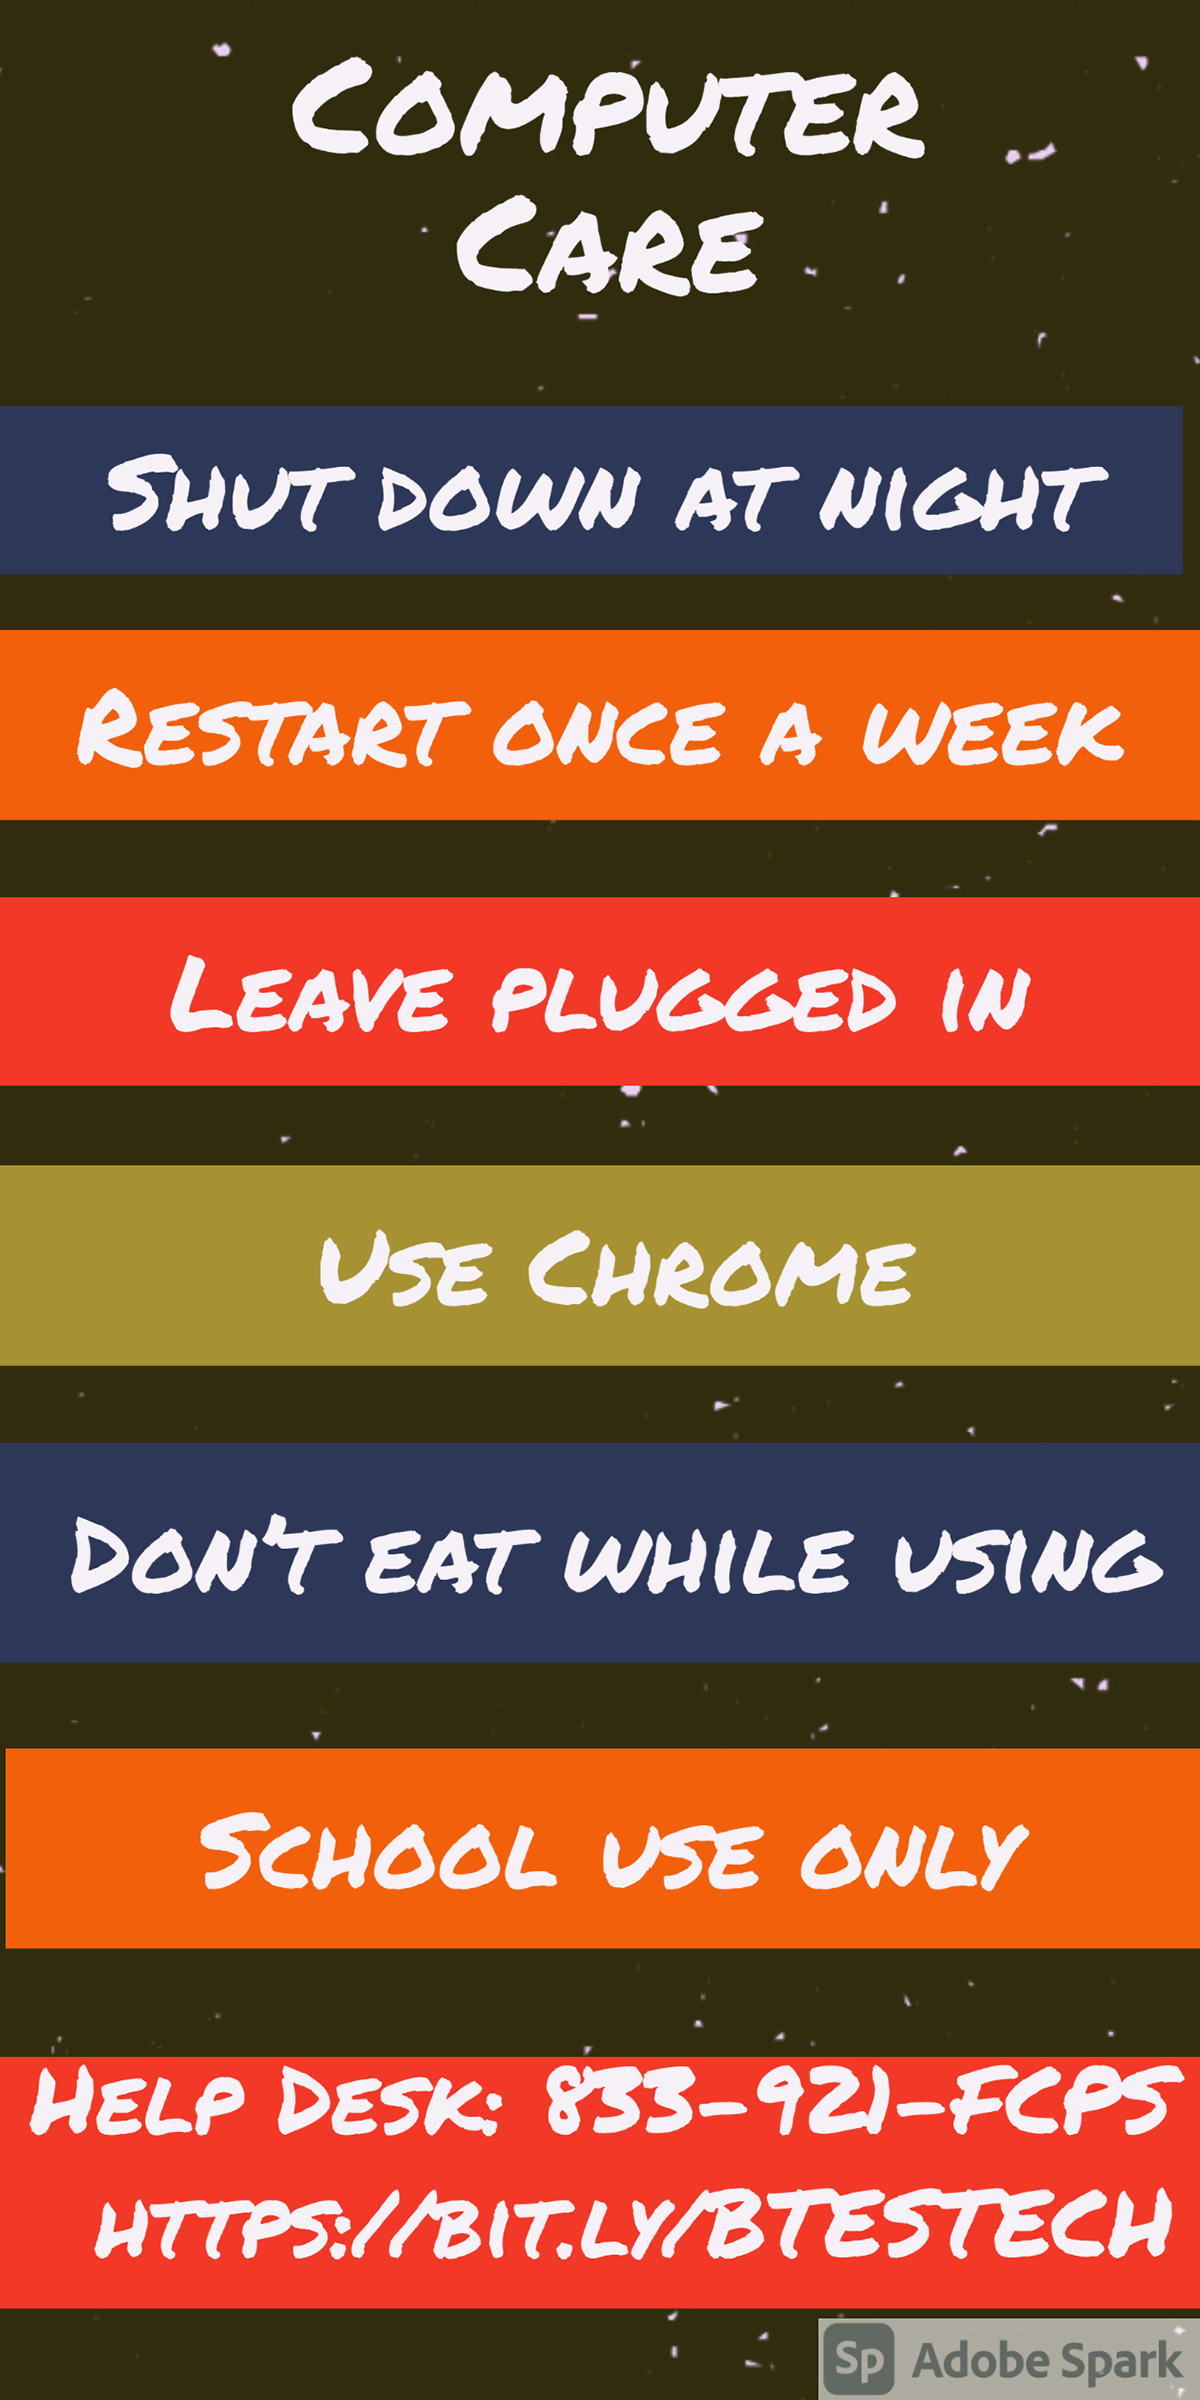 Computer Care Computer Care Use Chrome School use only Restart once a week Leave plugged in Don’t eat while using Shut down at night Help Desk: 833-921-FCPS https://bit.ly/BTESTECH